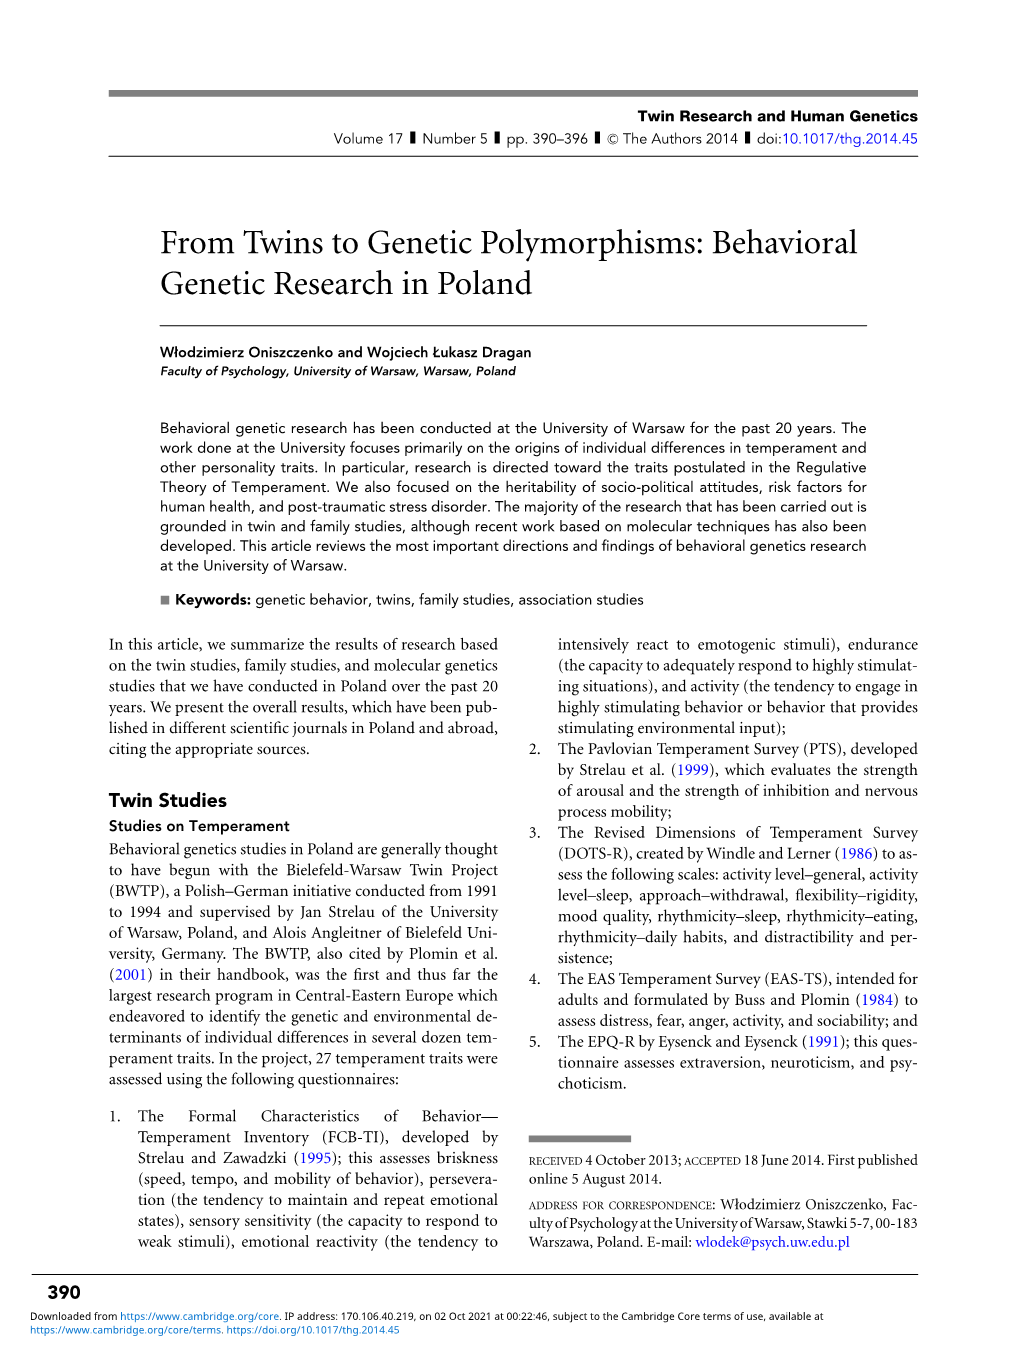 From Twins to Genetic Polymorphisms: Behavioral Genetic Research in Poland